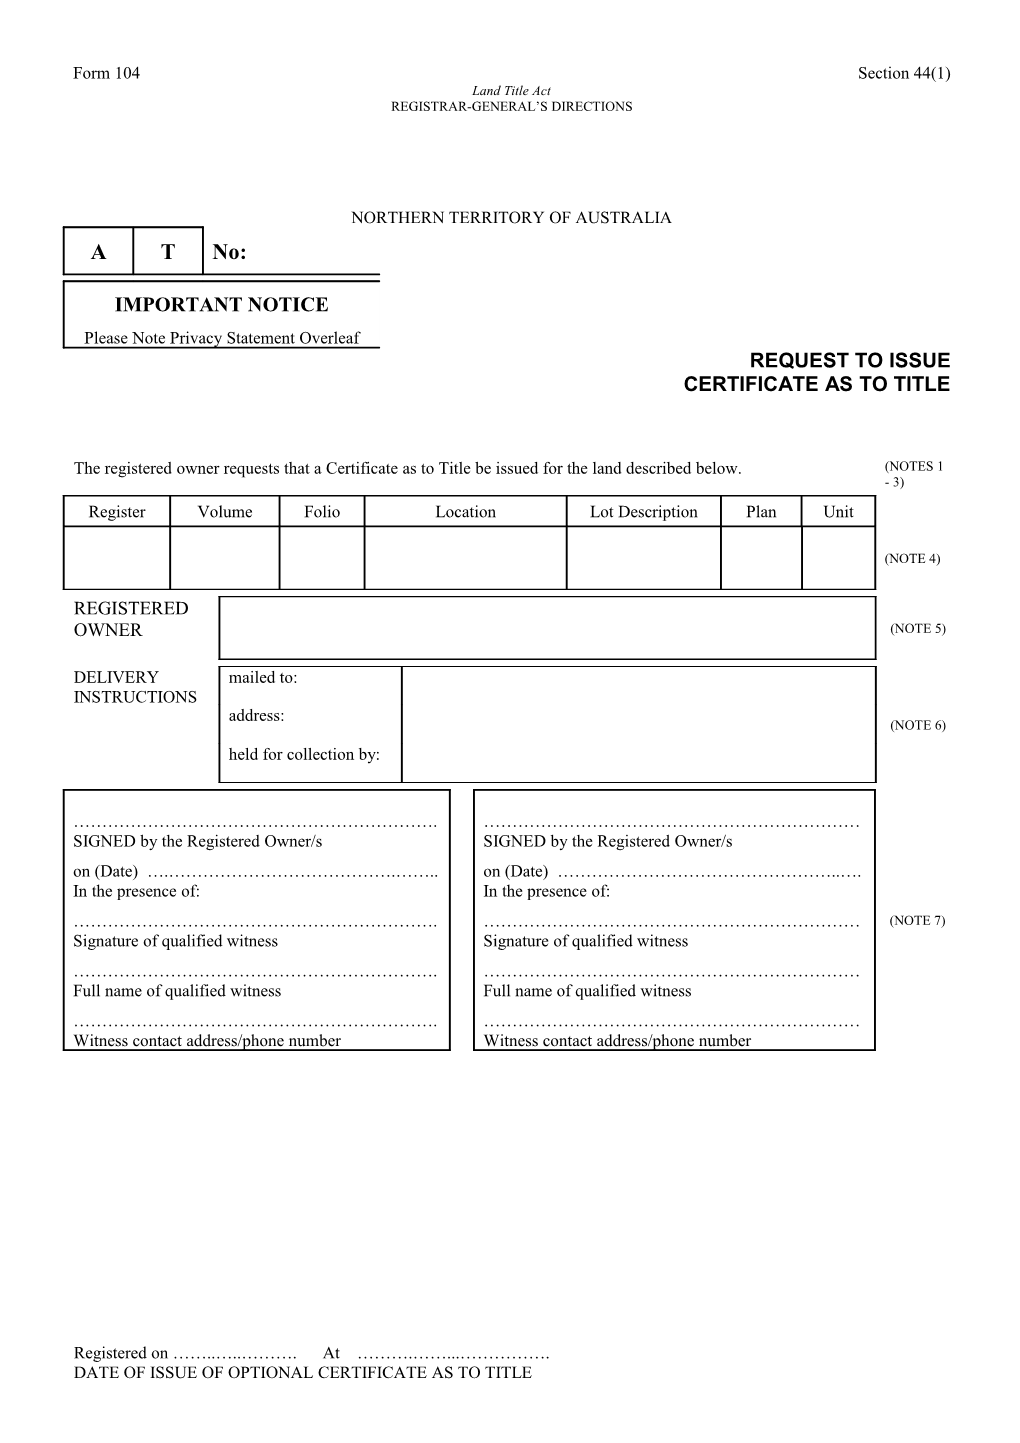 Form No. 104 - Request to Issue Certificate As to Title